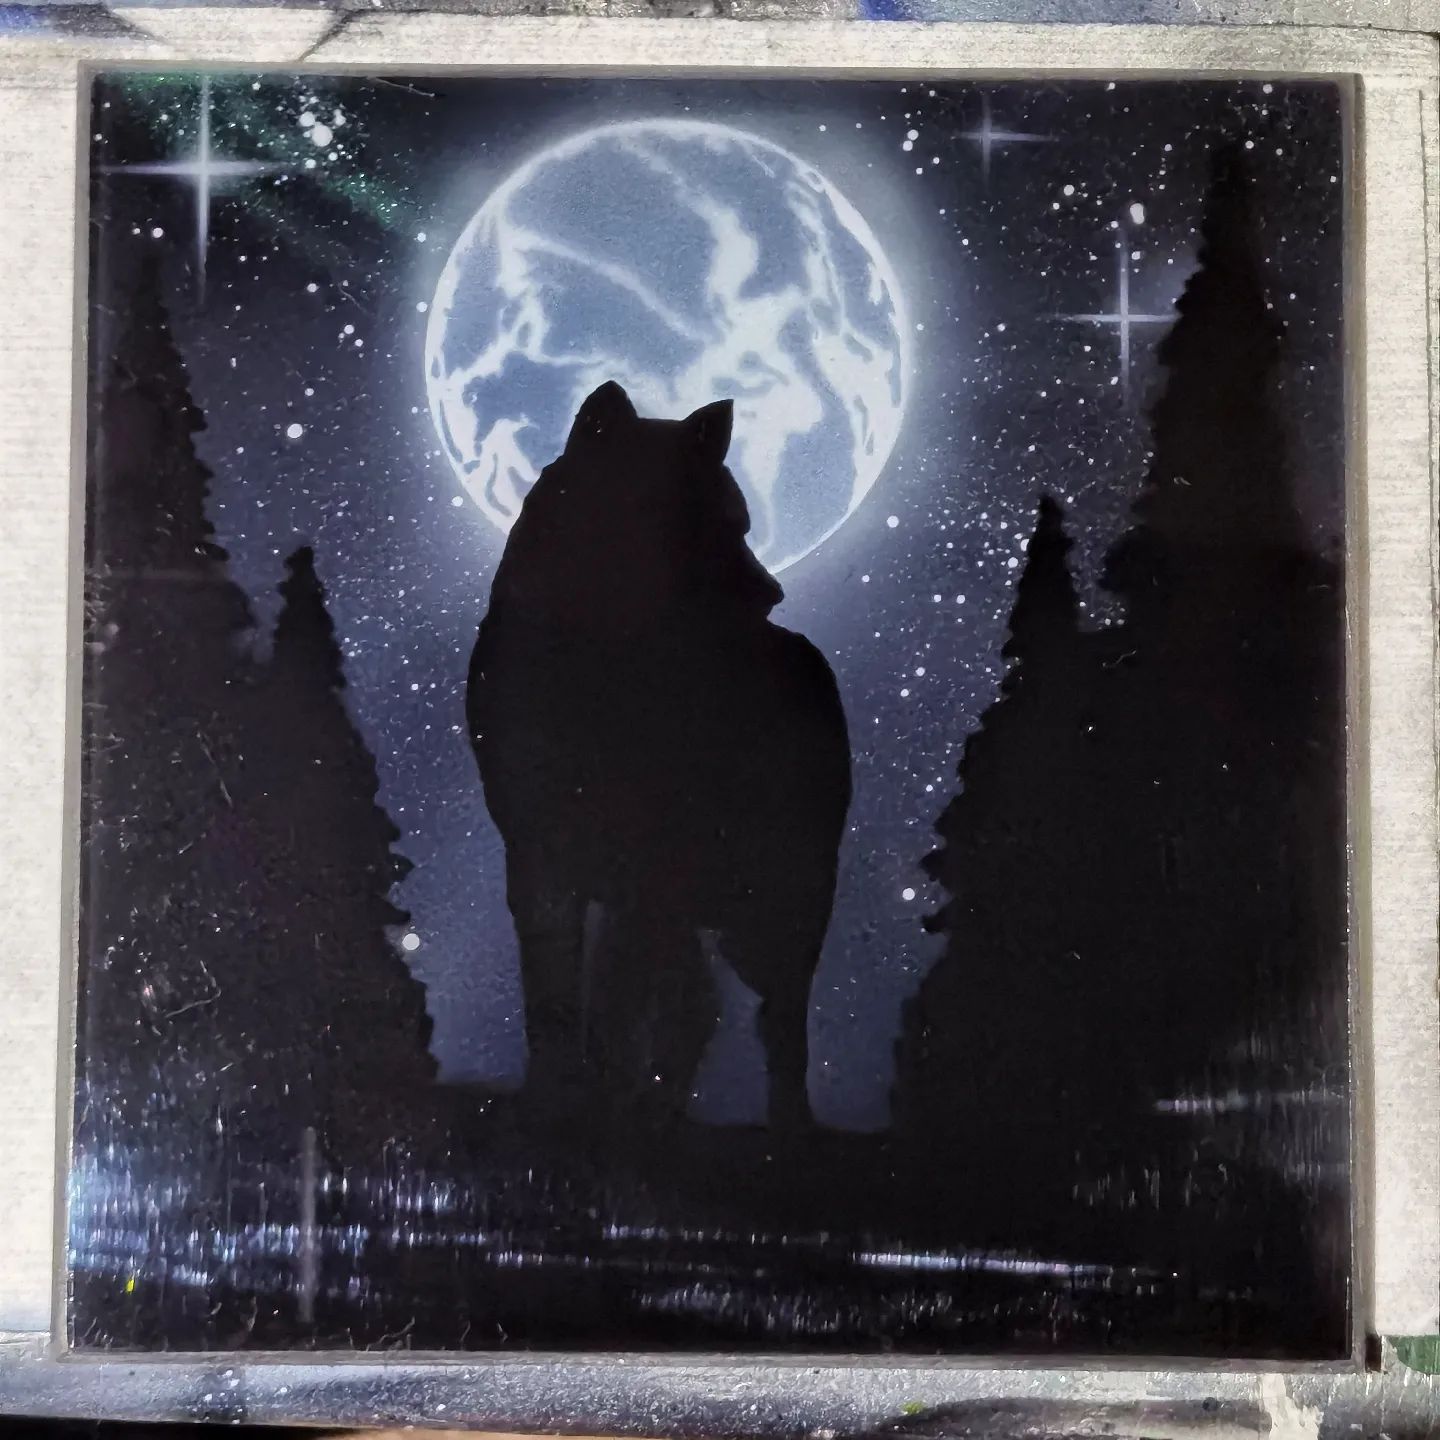 New airbrush tryout. First time brushed a reversed glass artwork. Airbrushed on the back of a 5mm thick Acrylglass. I think its a great work.  #airbrush #airbrushart #reversedglasspainting  #airbrushing #acrylglass #luftpinsel #hinterglasmalerei #kunst #wolf #nightsky #art #moon #airbrushart